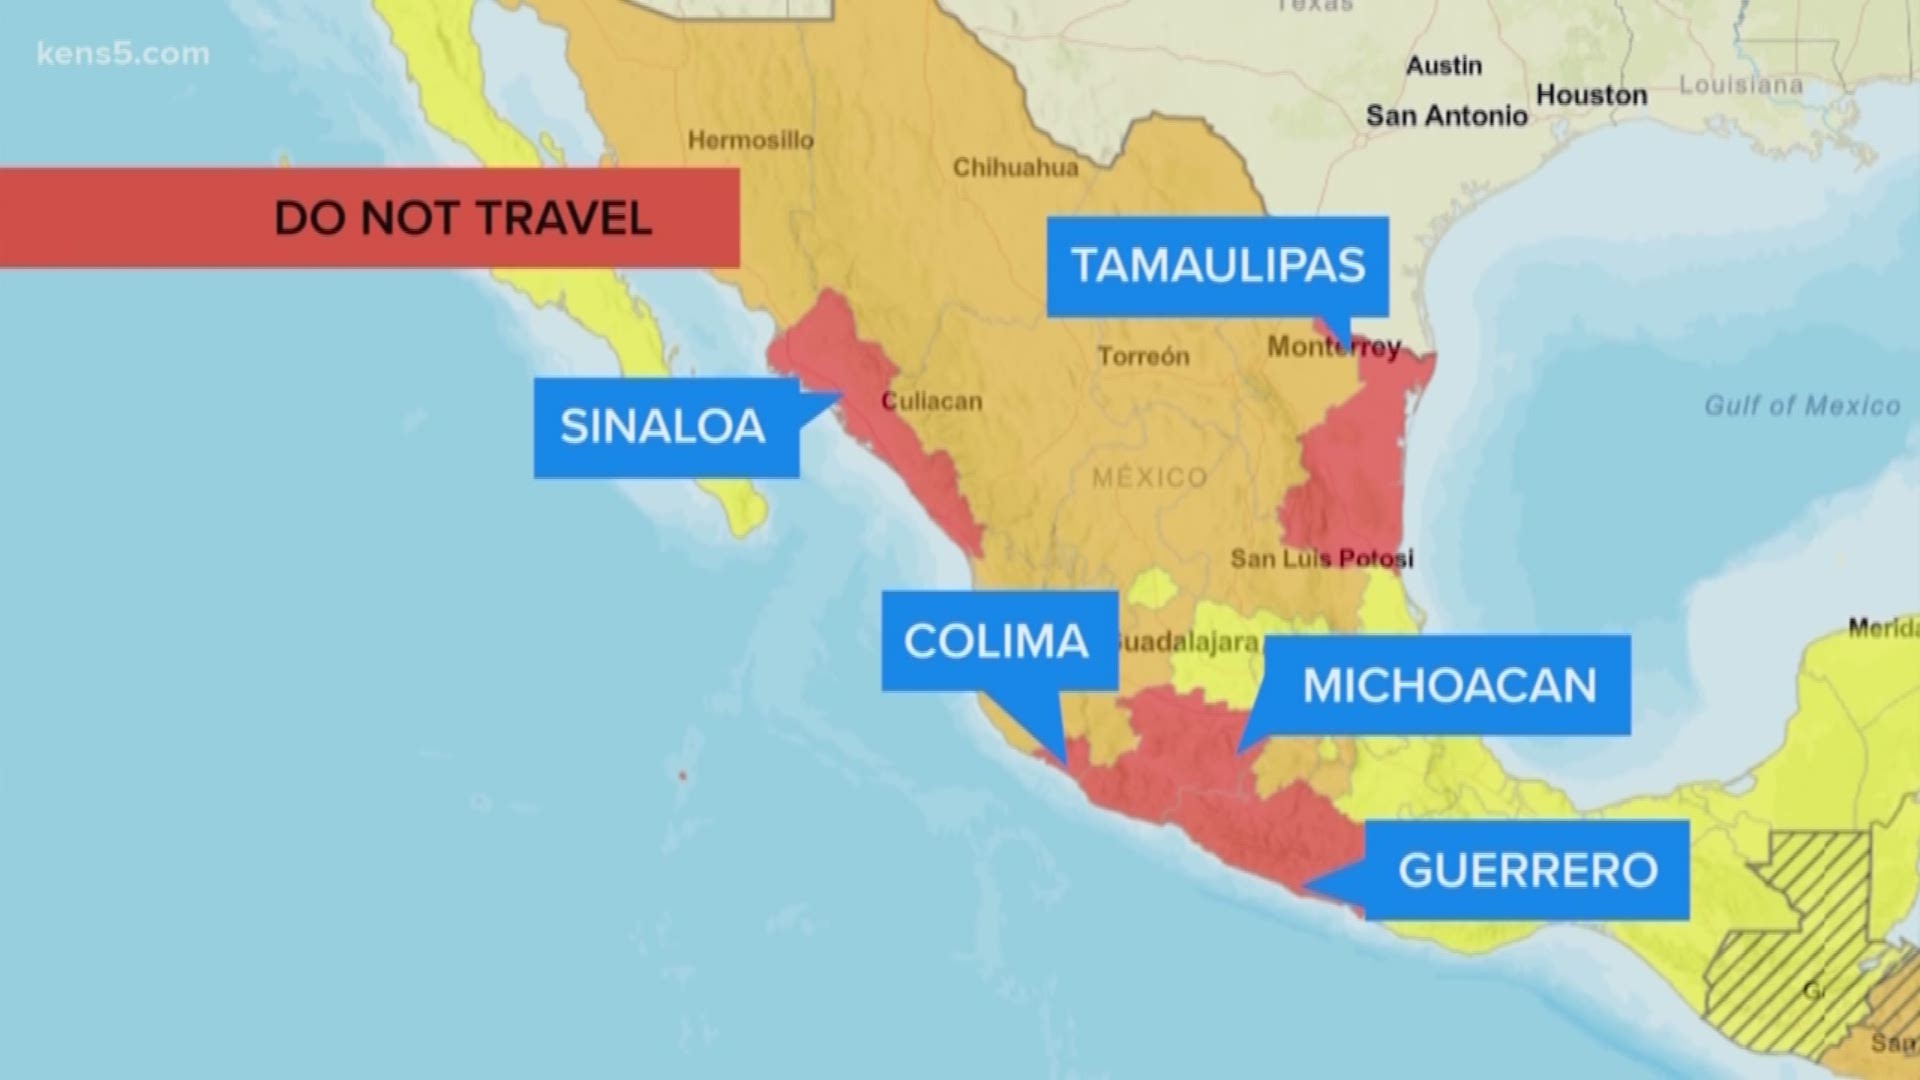 The U.S. State Department advises traveler to exercise increased caution when traveling to Mexico.